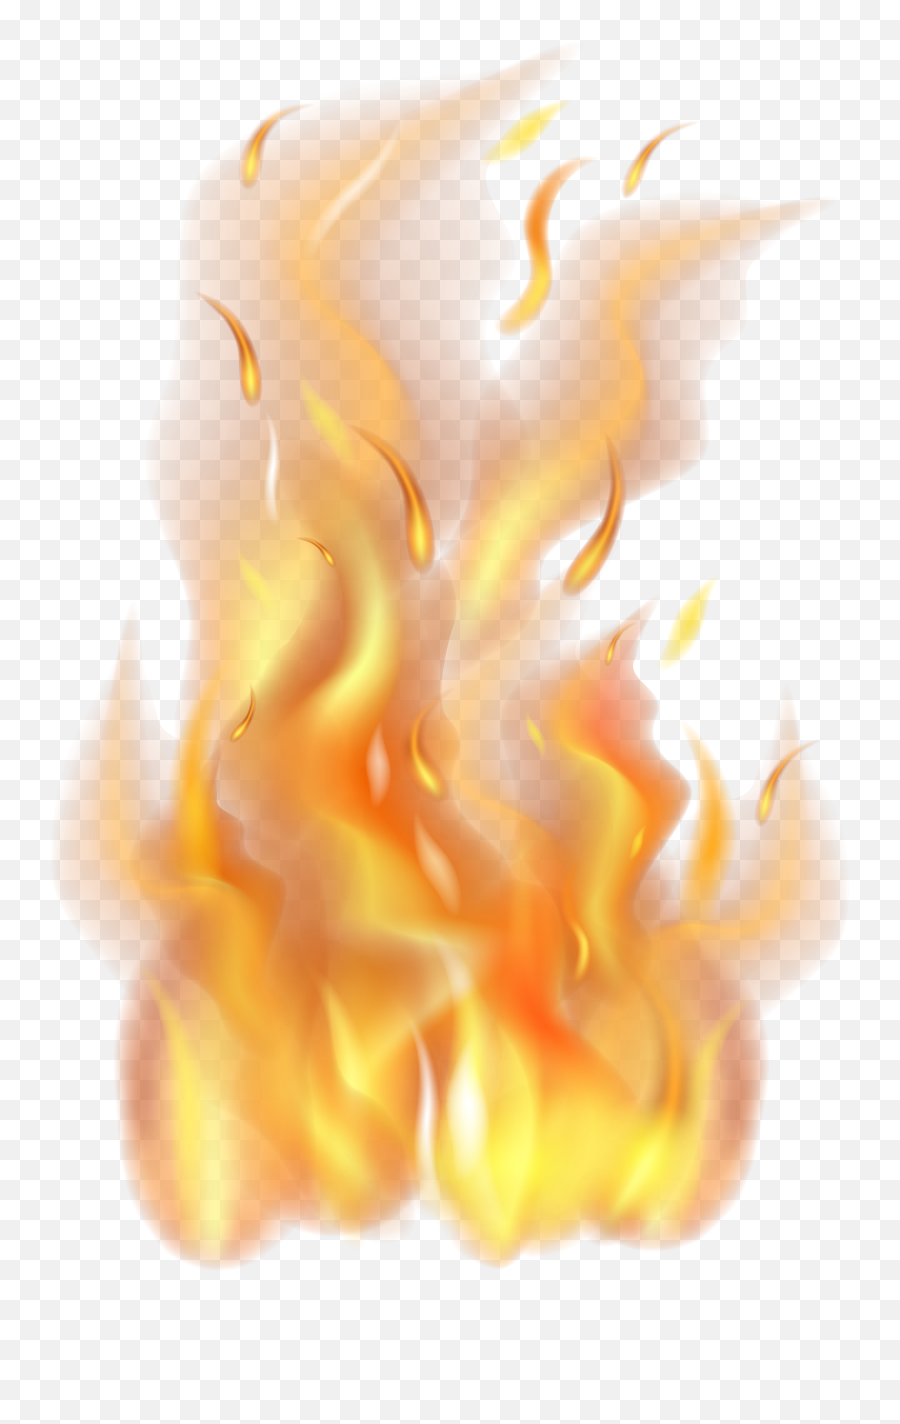 Flames Transparent Fire Png Fire Images Free Puzzle On - Transparent Pictures Of Flames Emoji,Flame Emoji No Background